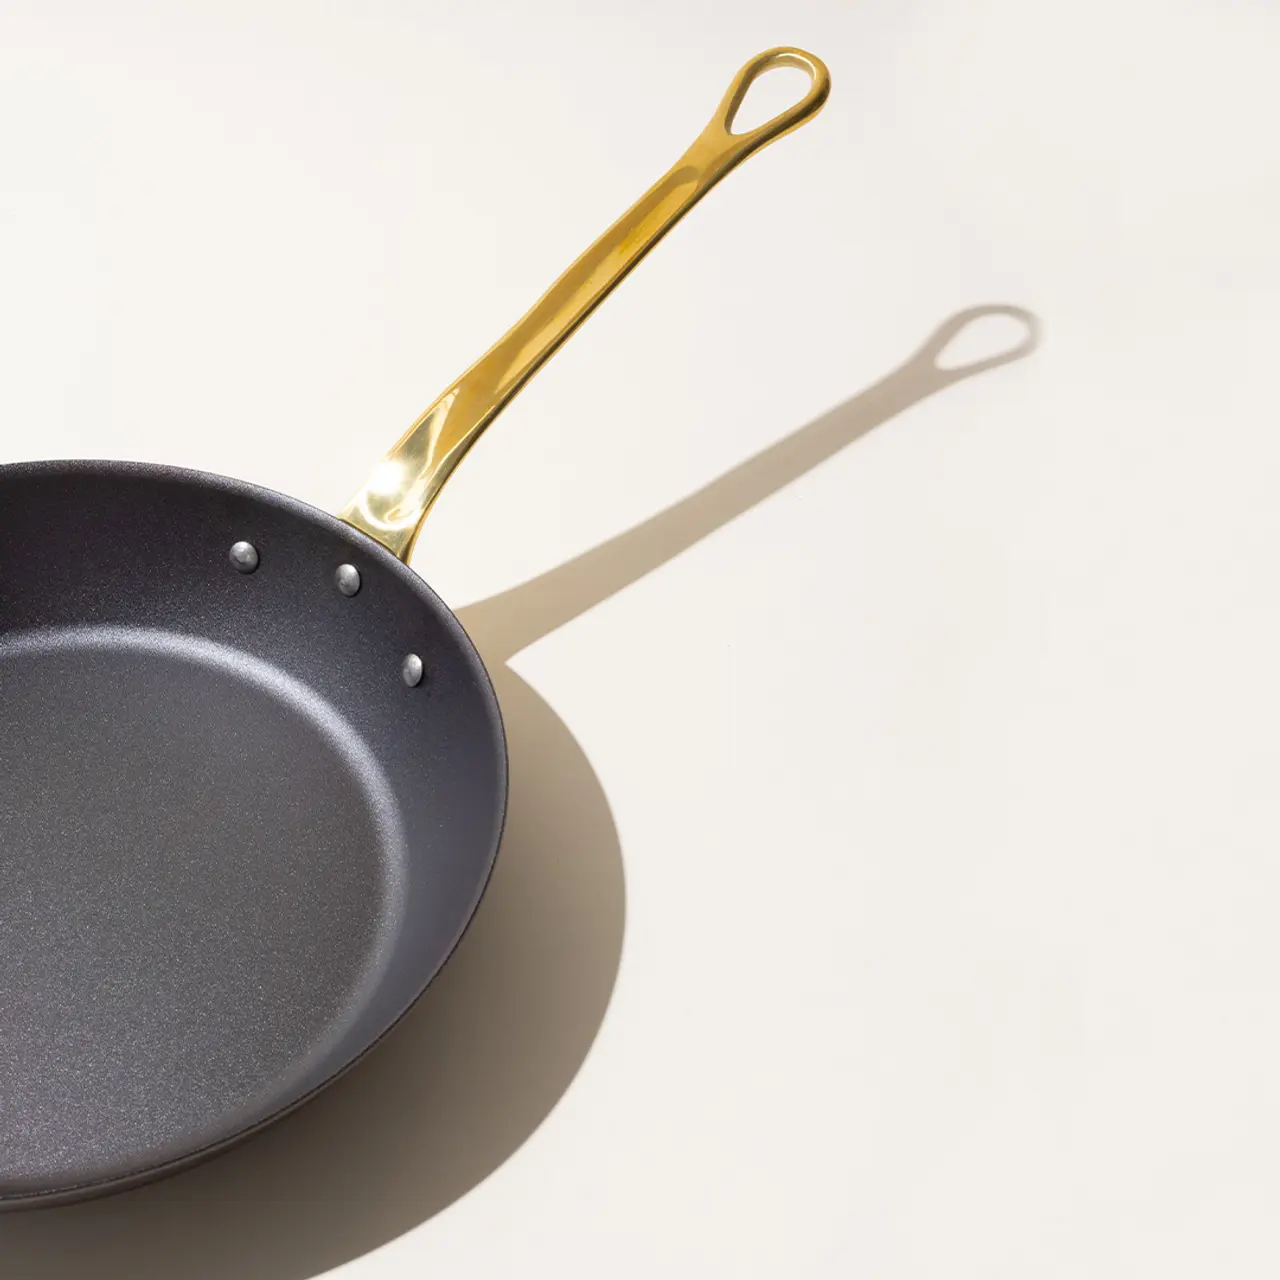 A non-stick frying pan with a golden handle casting a shadow on a light background.